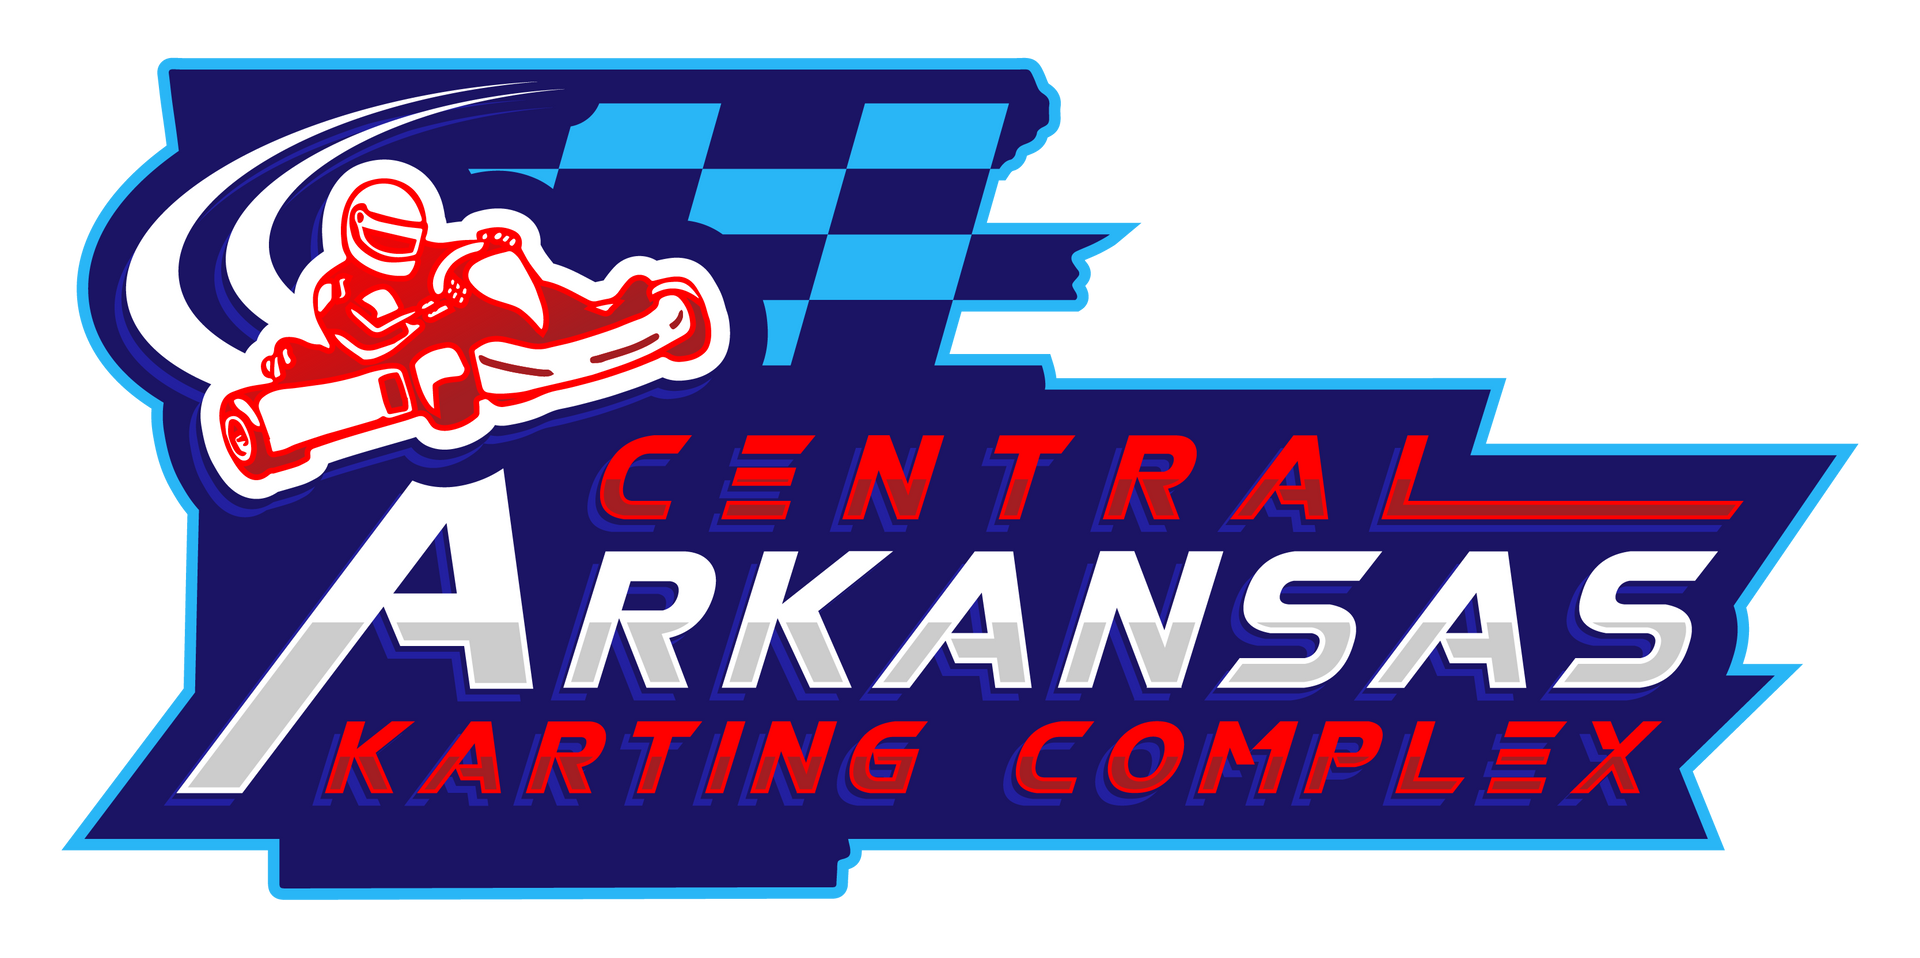 The logo for central arkansas karting complex shows a person riding a kart.